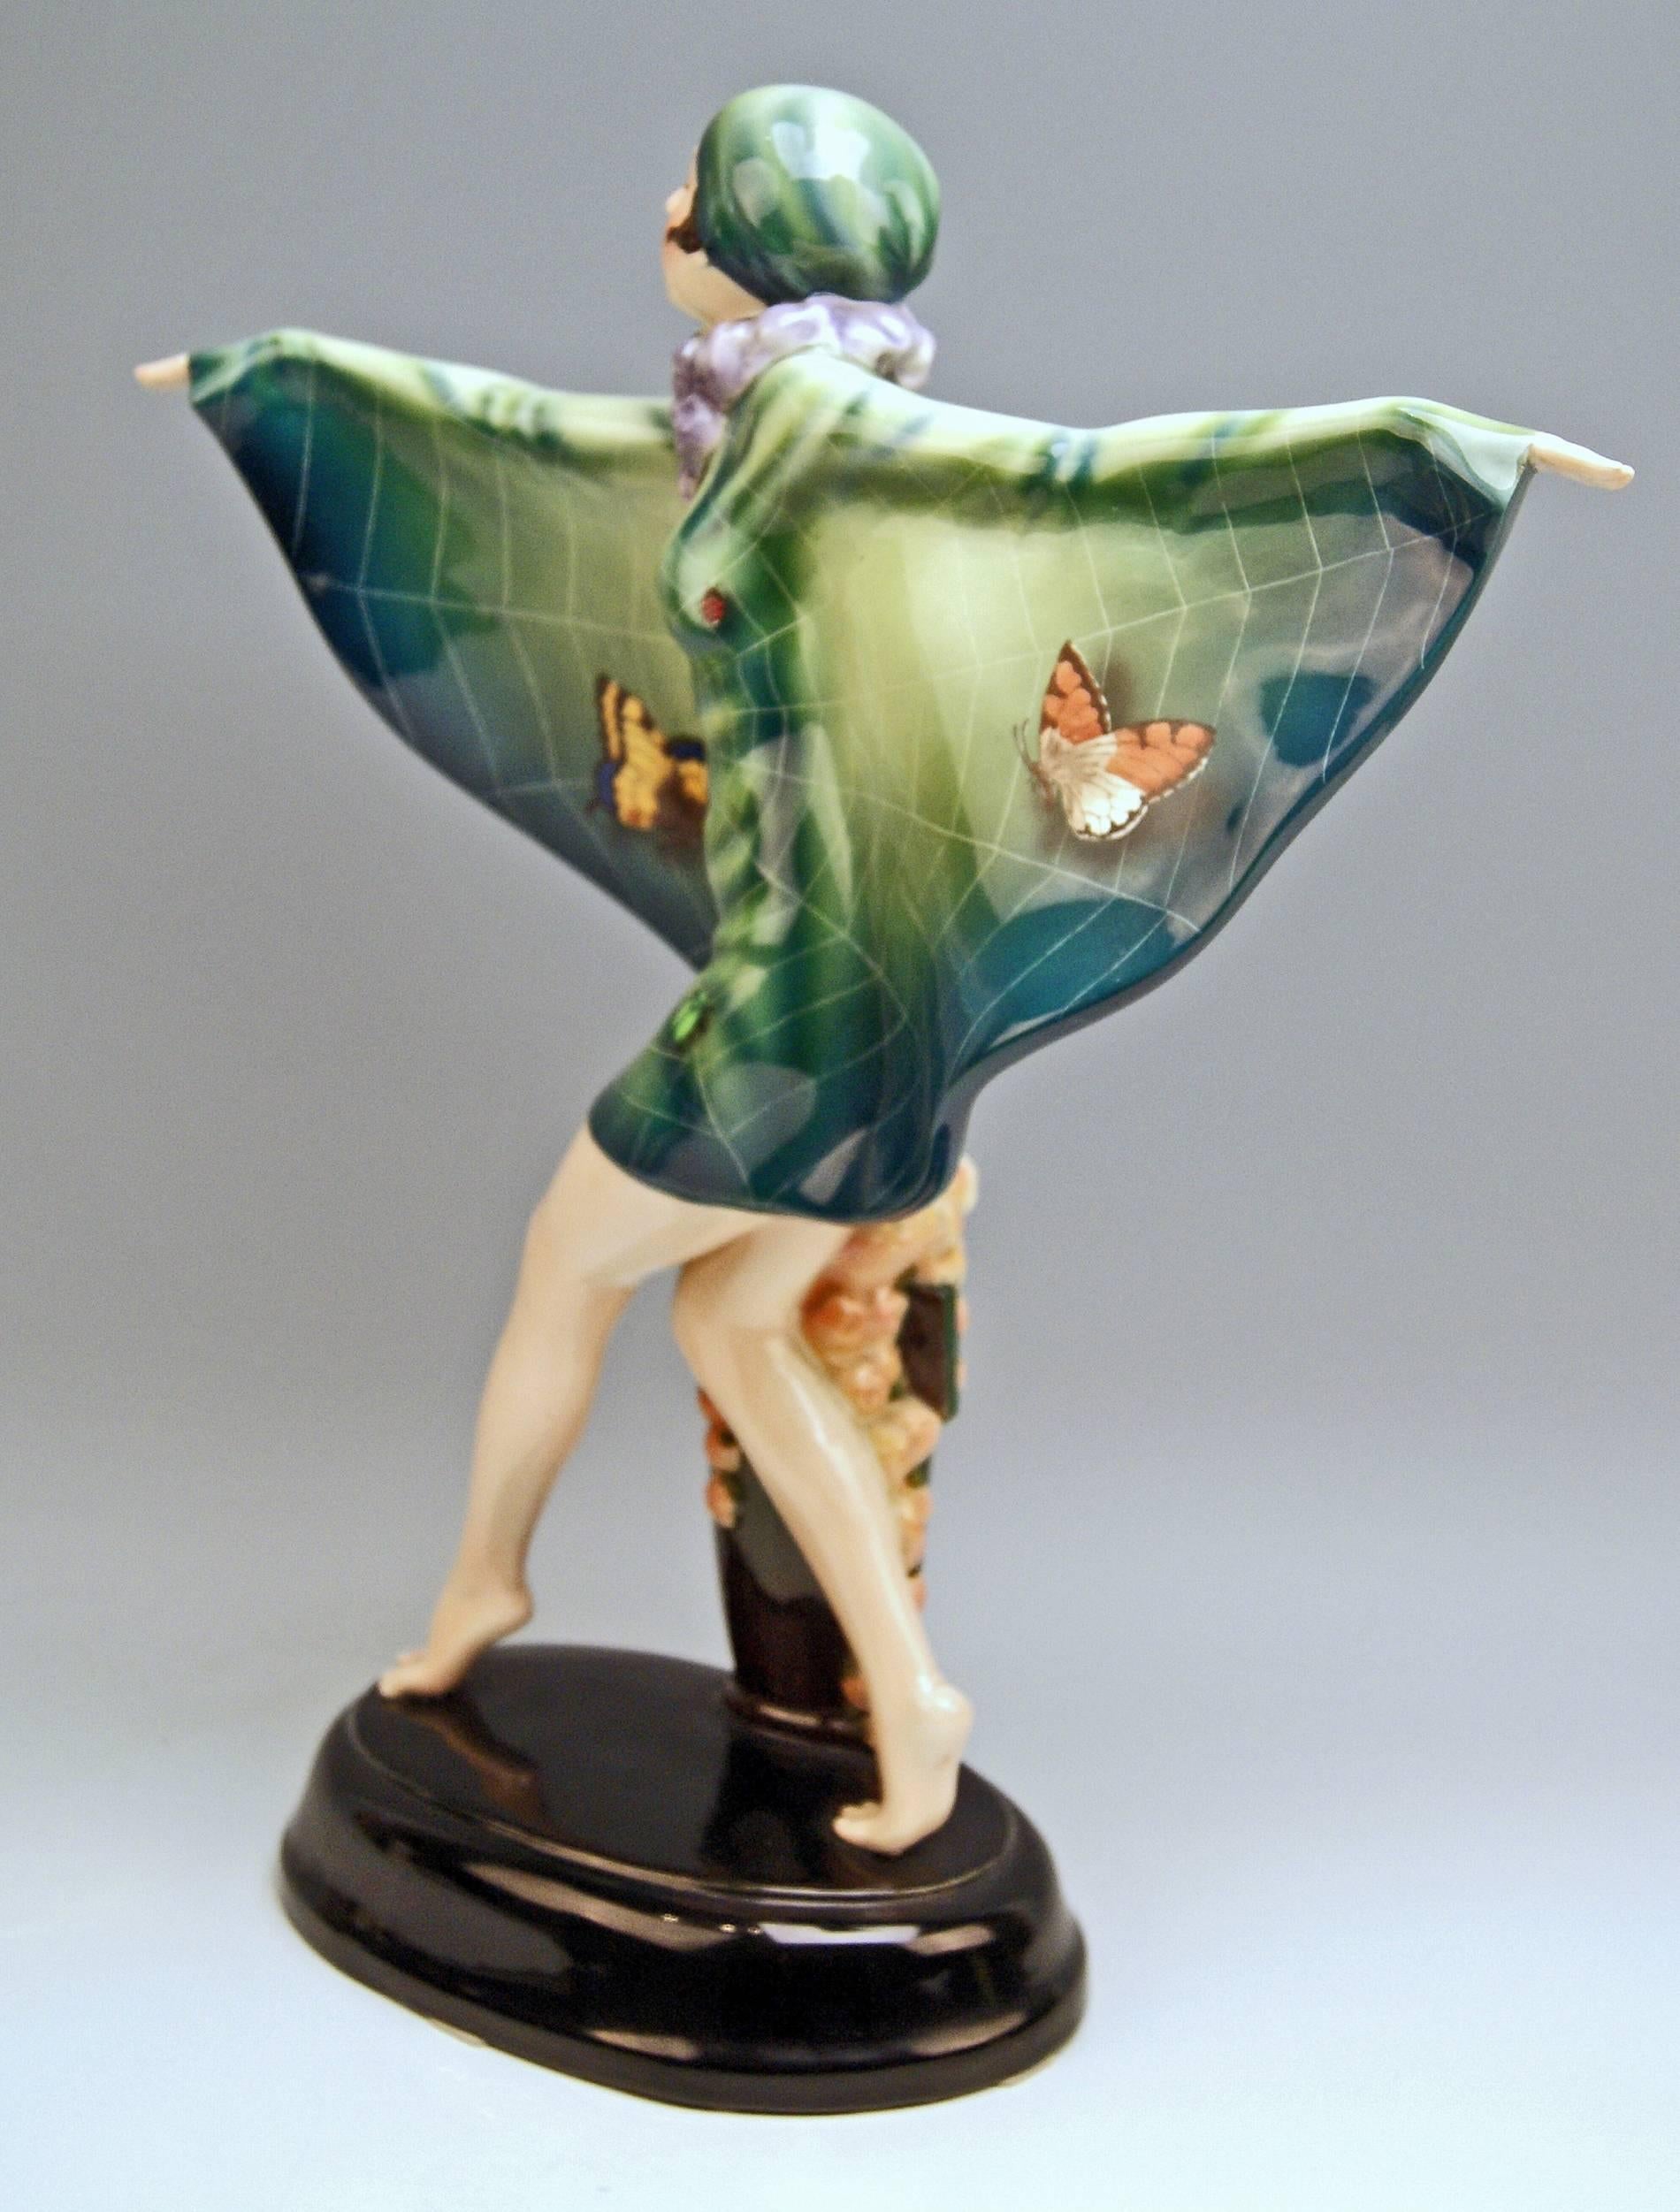 Goldscheider Vienna gorgeous dancing lady figurine: The Captured Bird

Designed by Josef Lorenzl (1892-1950) / one of the most important designers having been active for Goldscheider manufactory in period of 1920-1940 / designed 1922 (quite